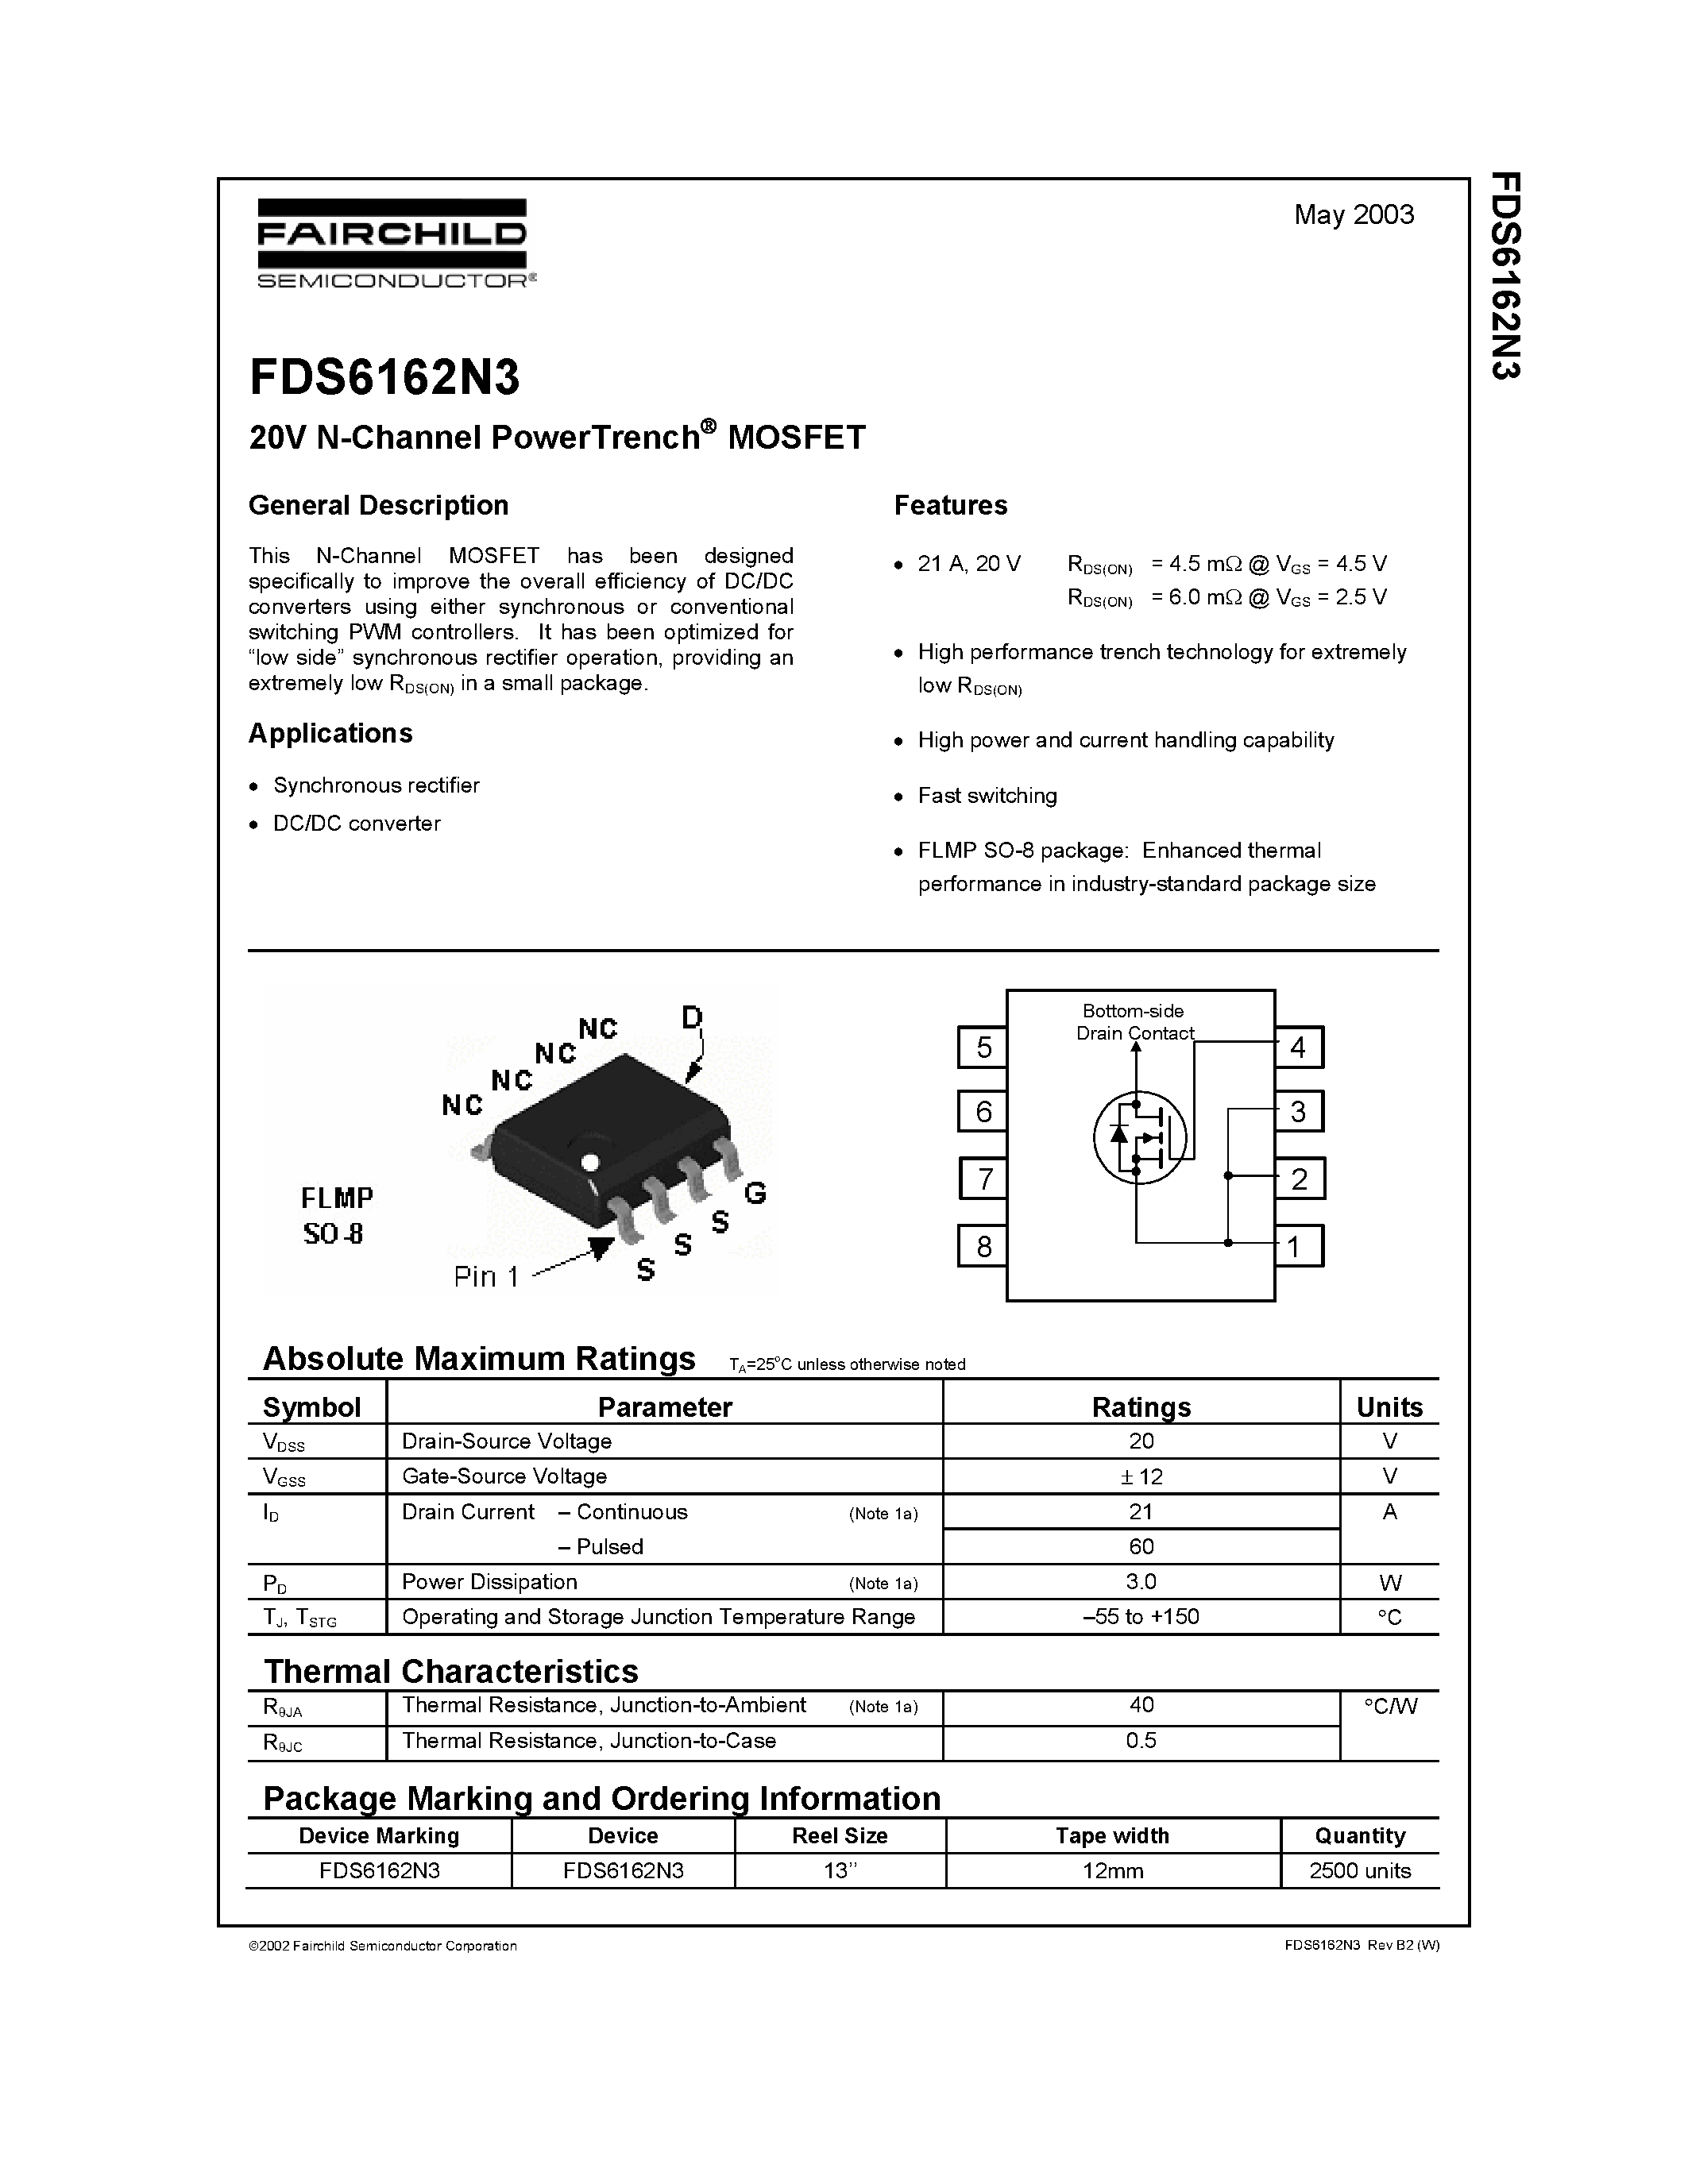 Datasheet FDS6162N3 - 20V N-Channel PowerTrench MOSFET page 1